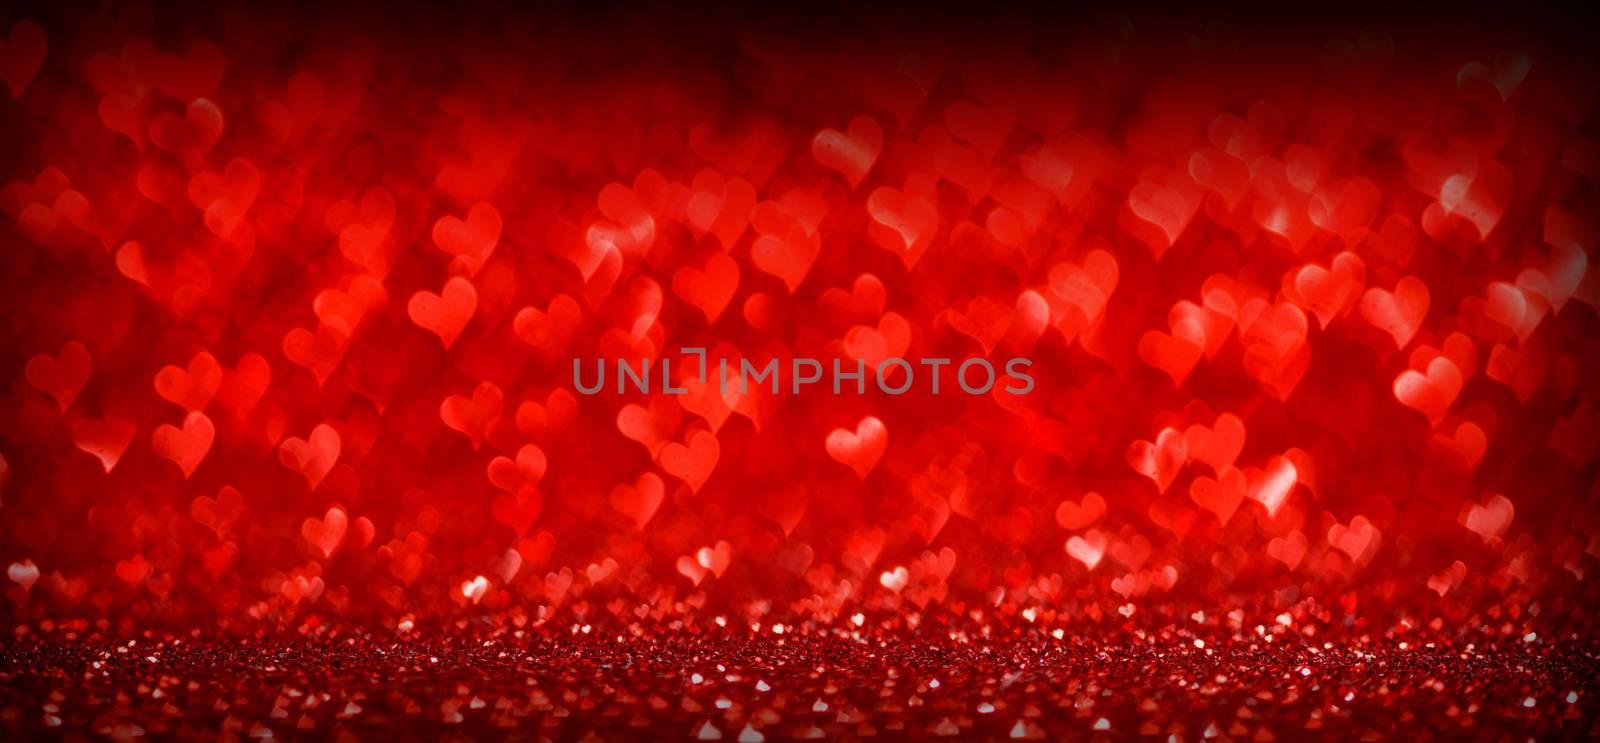 Red hearts background by Yellowj